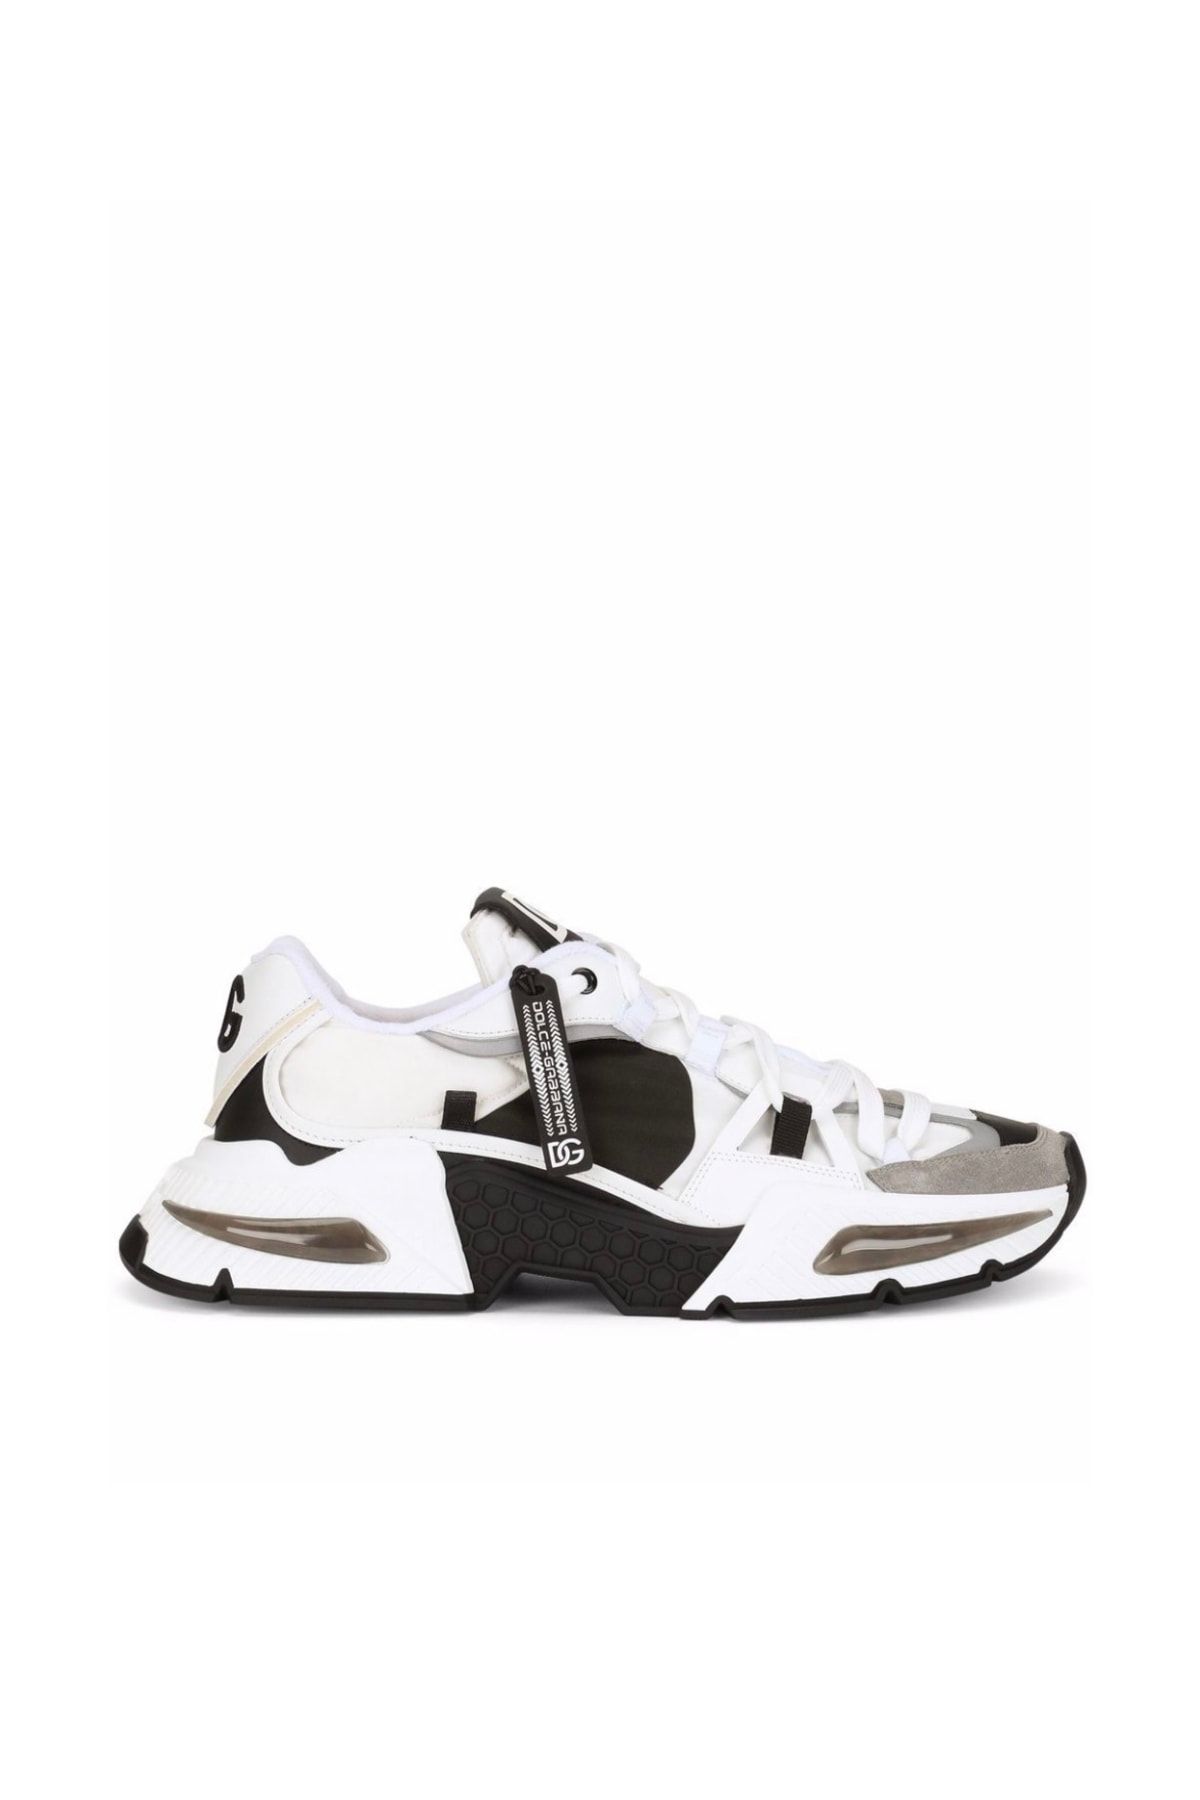 Dolce&Gabbana Airmaster Panelled Low-top Sneakers